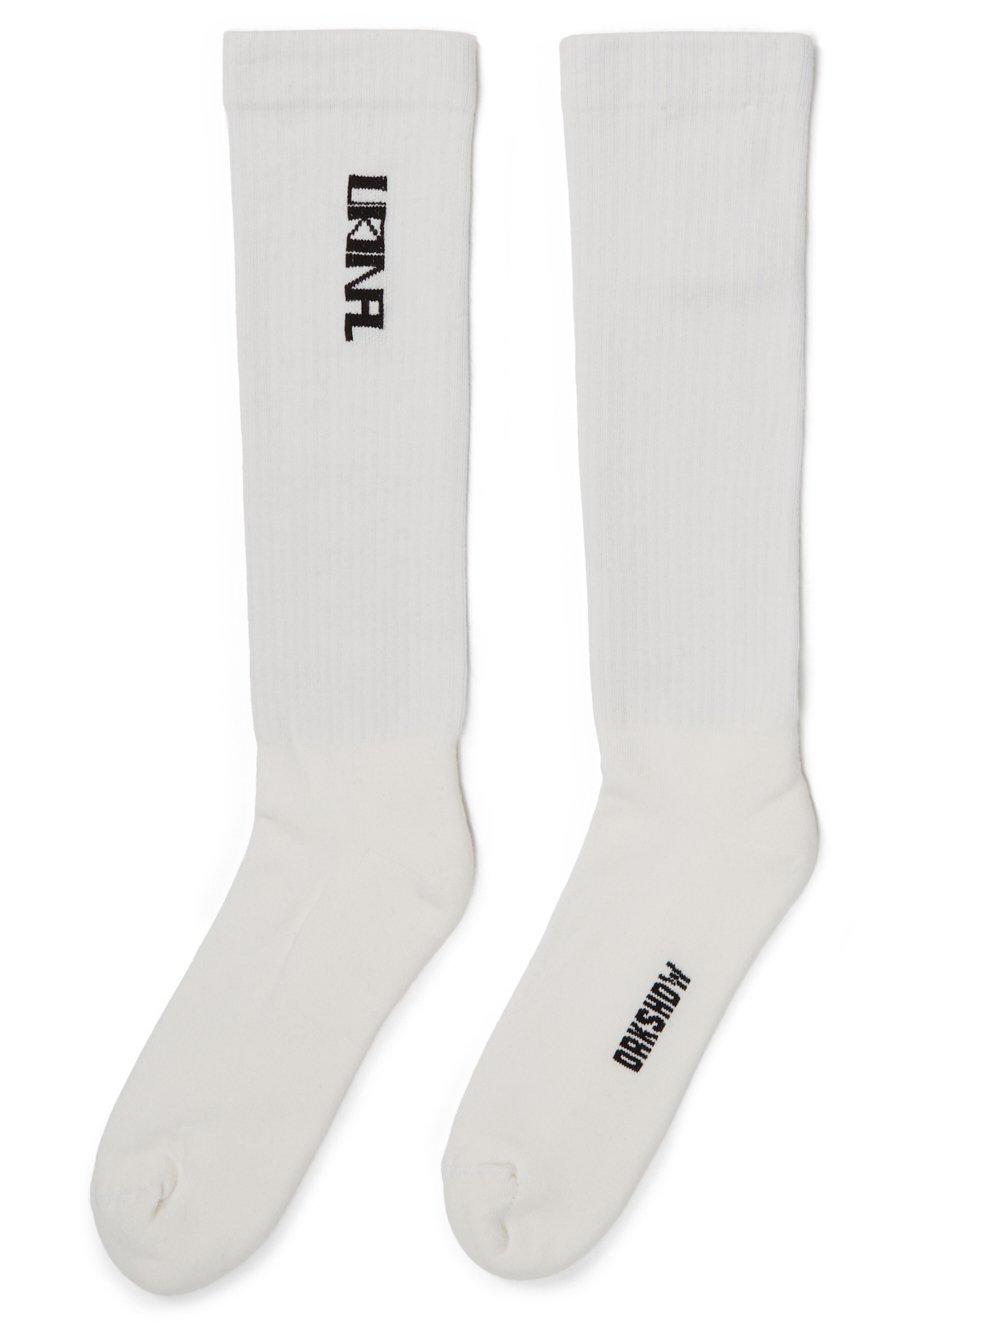 RICK OWENS FW23 LUXOR URINAL SOCKS IN MILK AND BLACK COTTON KNIT